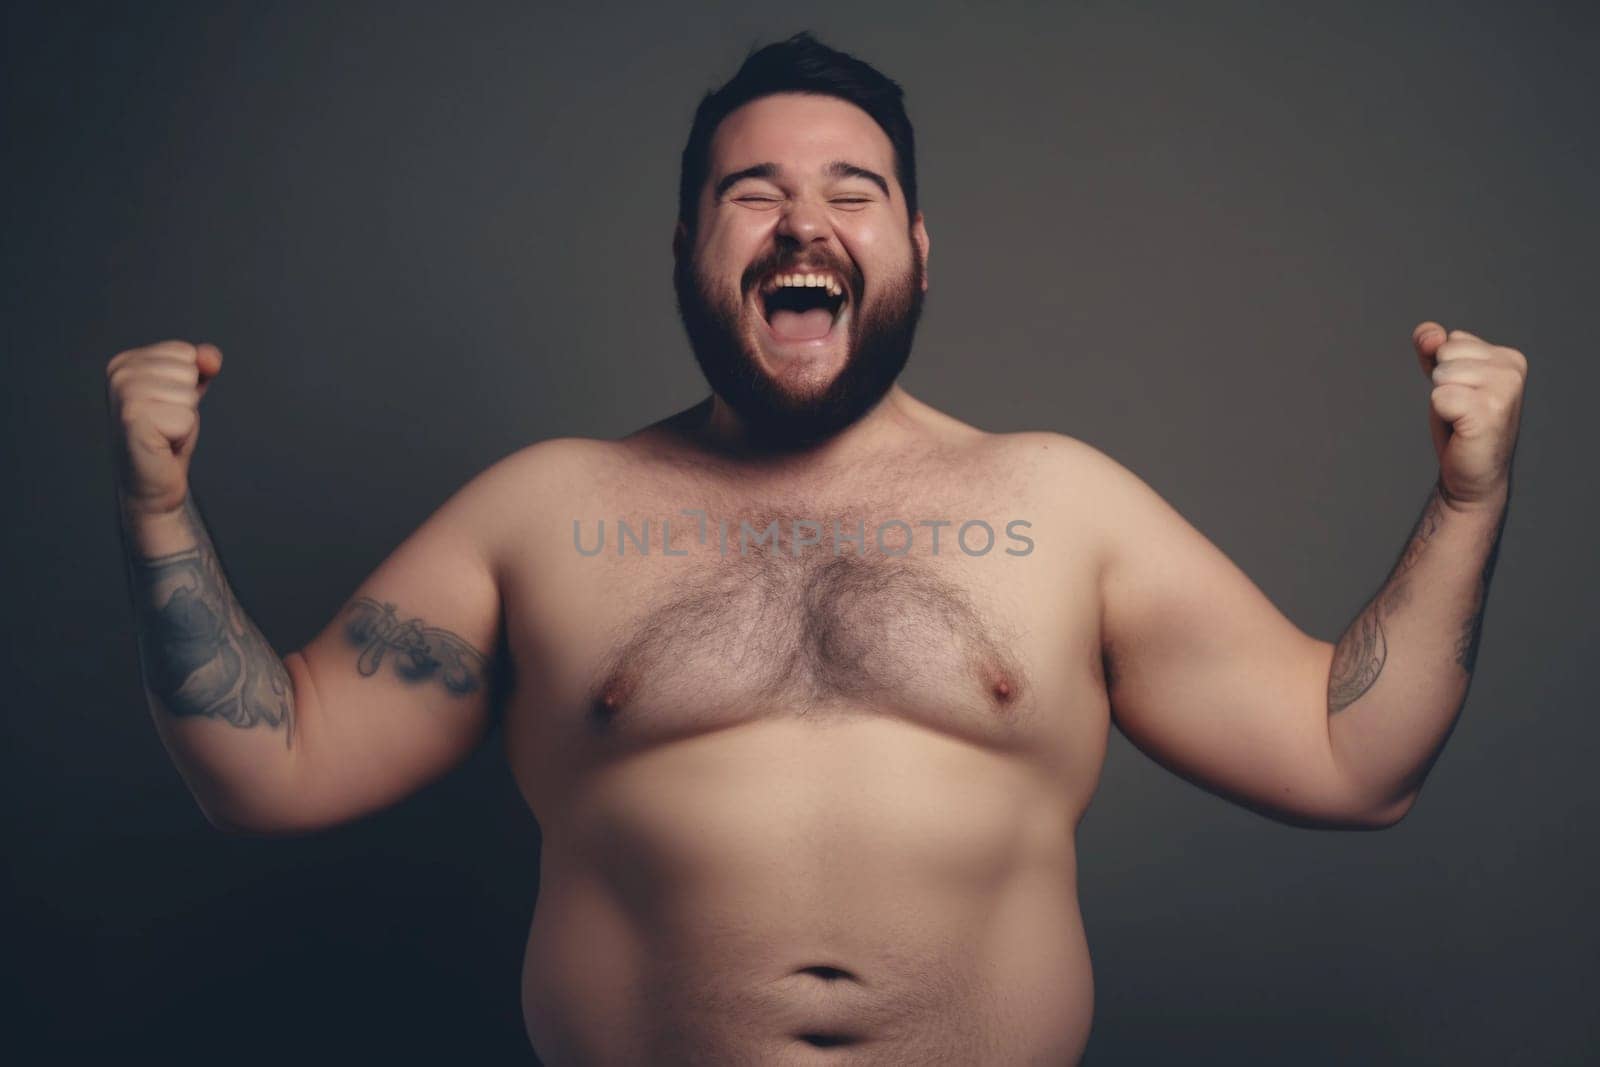 A man with a tattoo on his chest is laughing.